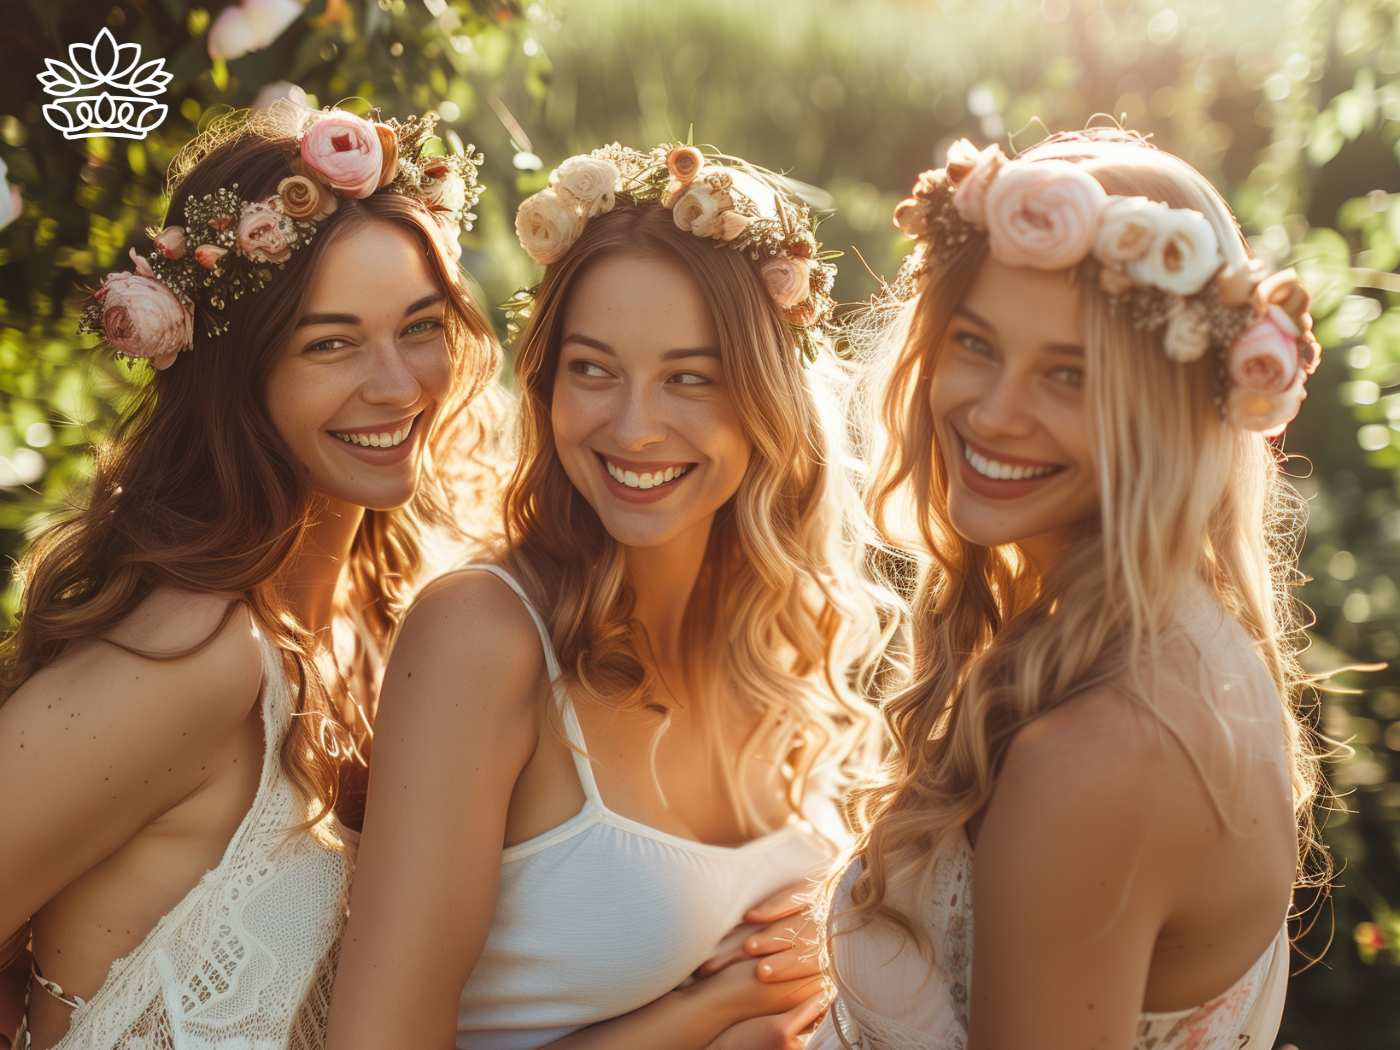 Three joyous friends with radiant smiles wearing flower crowns in a sunlit garden, a charming moment captured for Fabulous Flowers and Gifts.